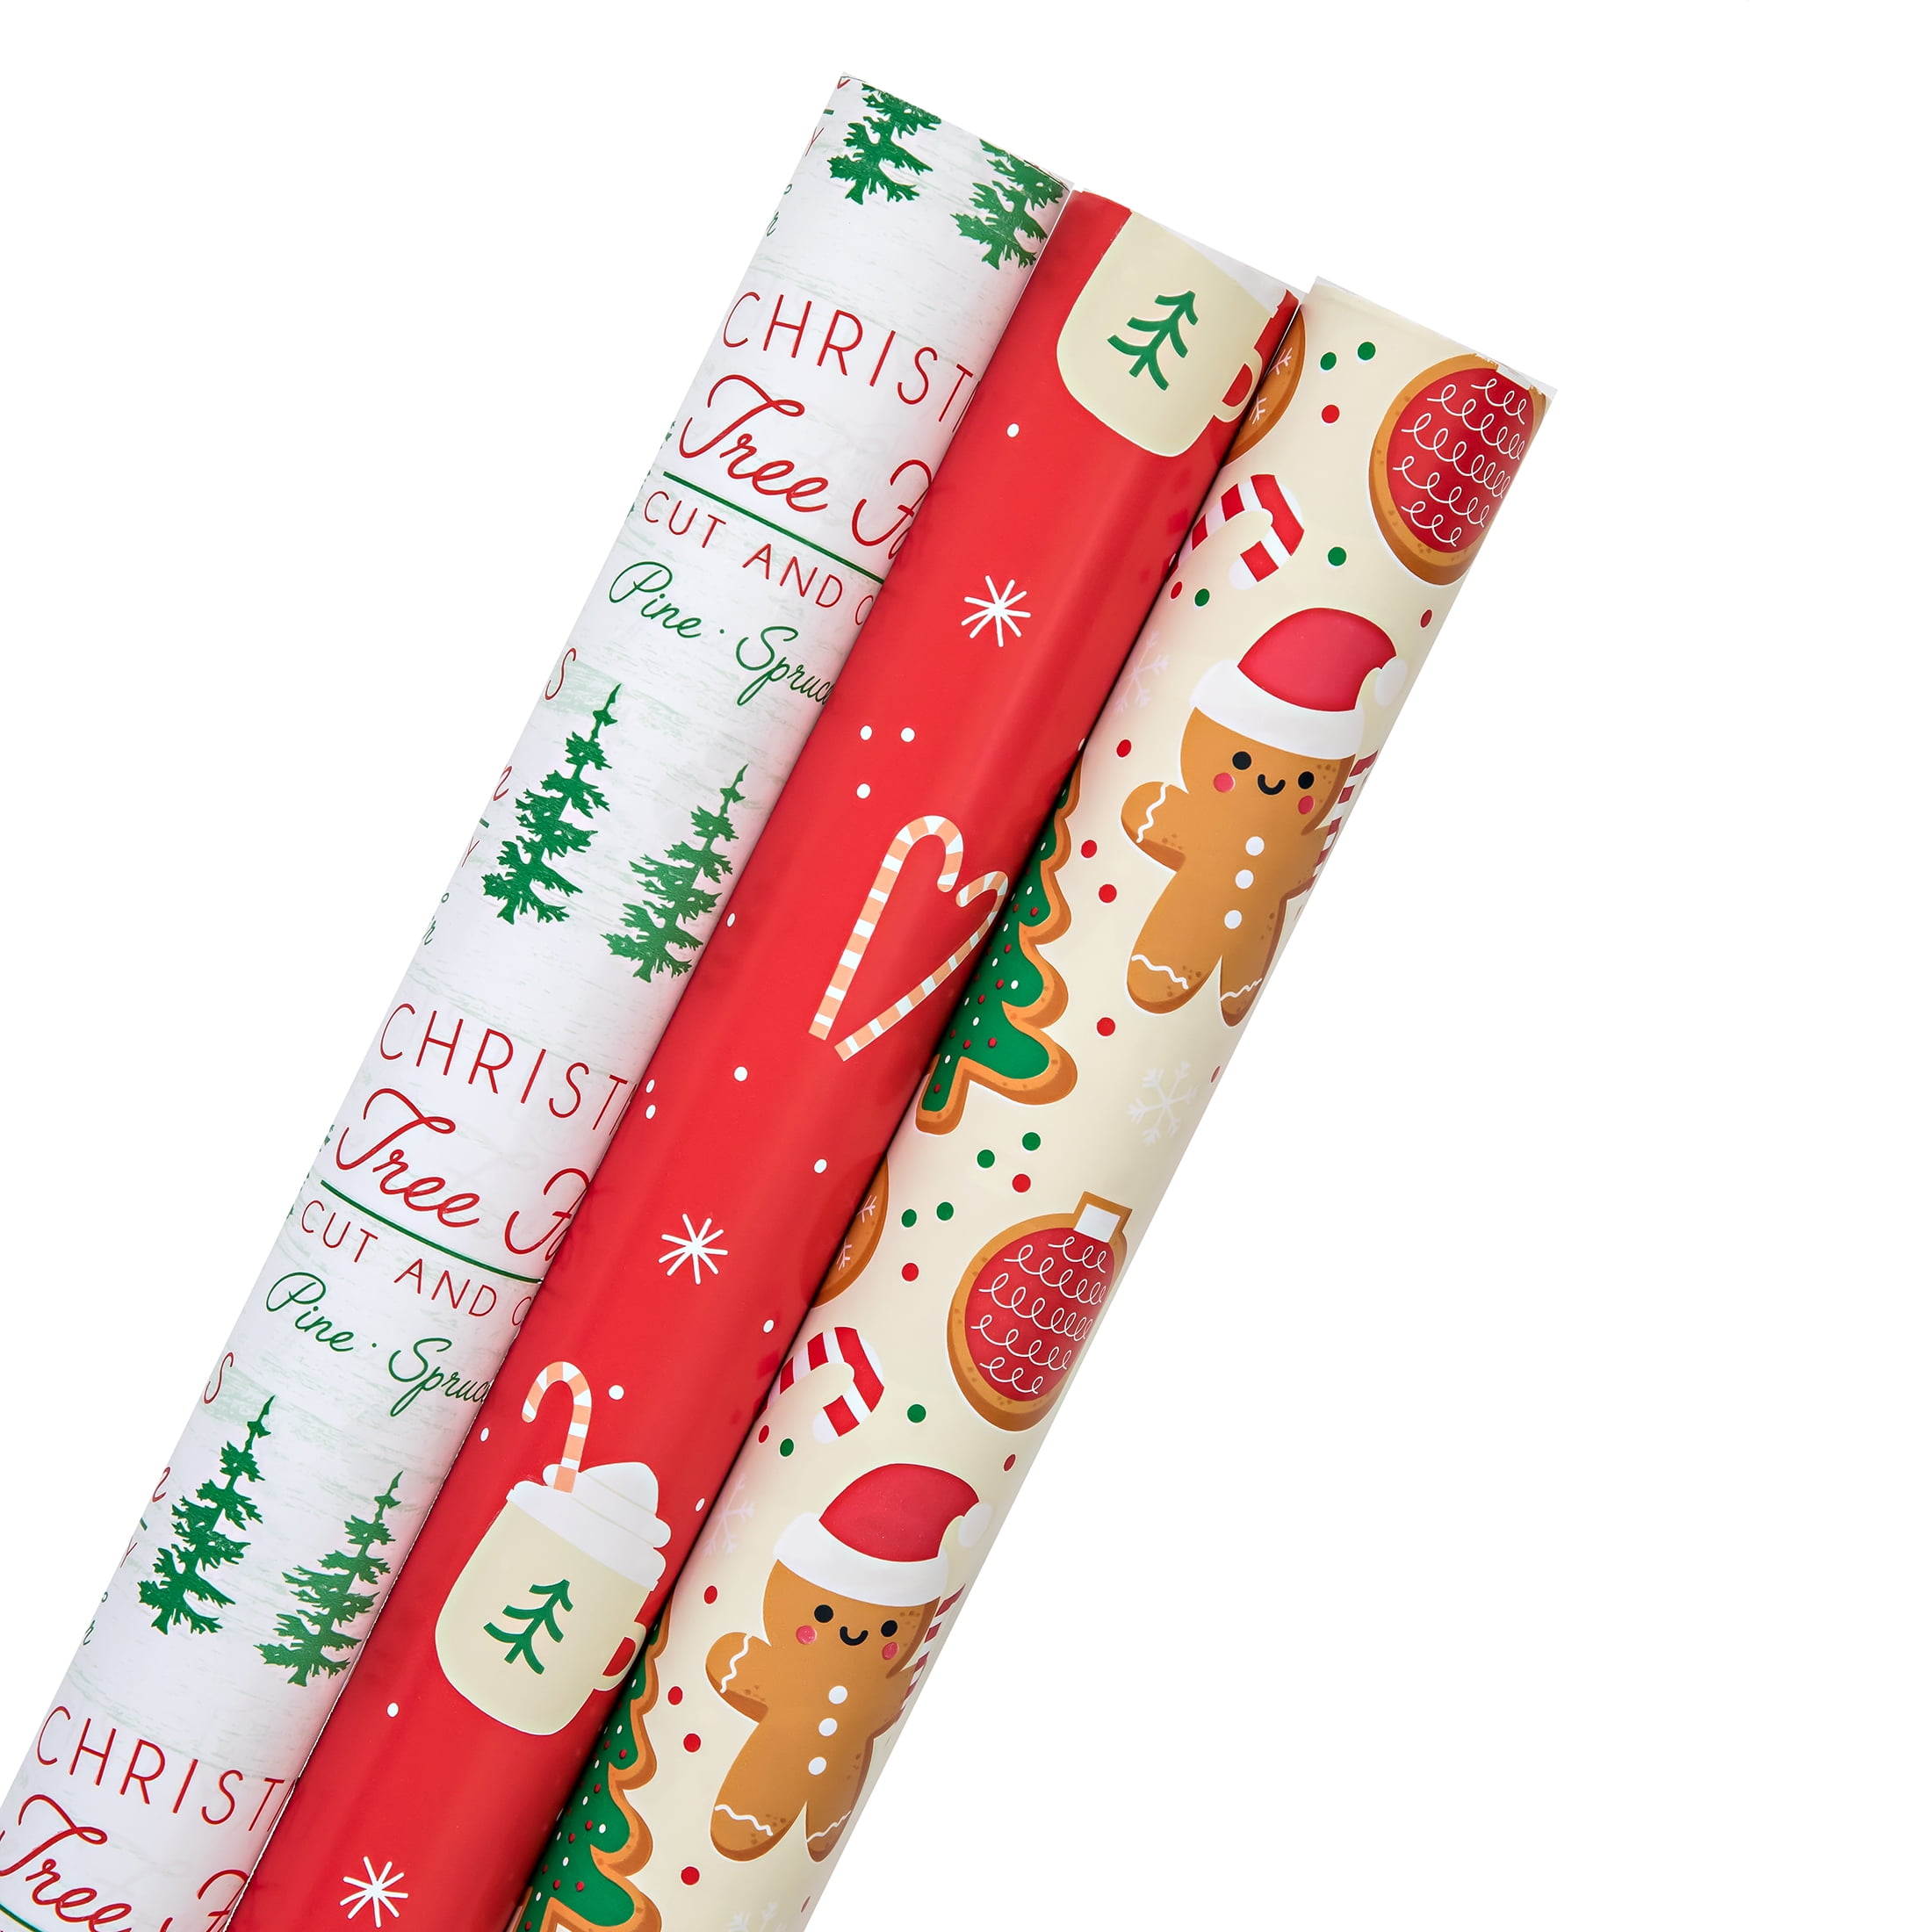 Holiday Time Premium Scented Gift Wrapping Paper, 3 Rolls, Peppermint,  Gingerbread, and Christmas Tree Scented Gift Wrapping Paper